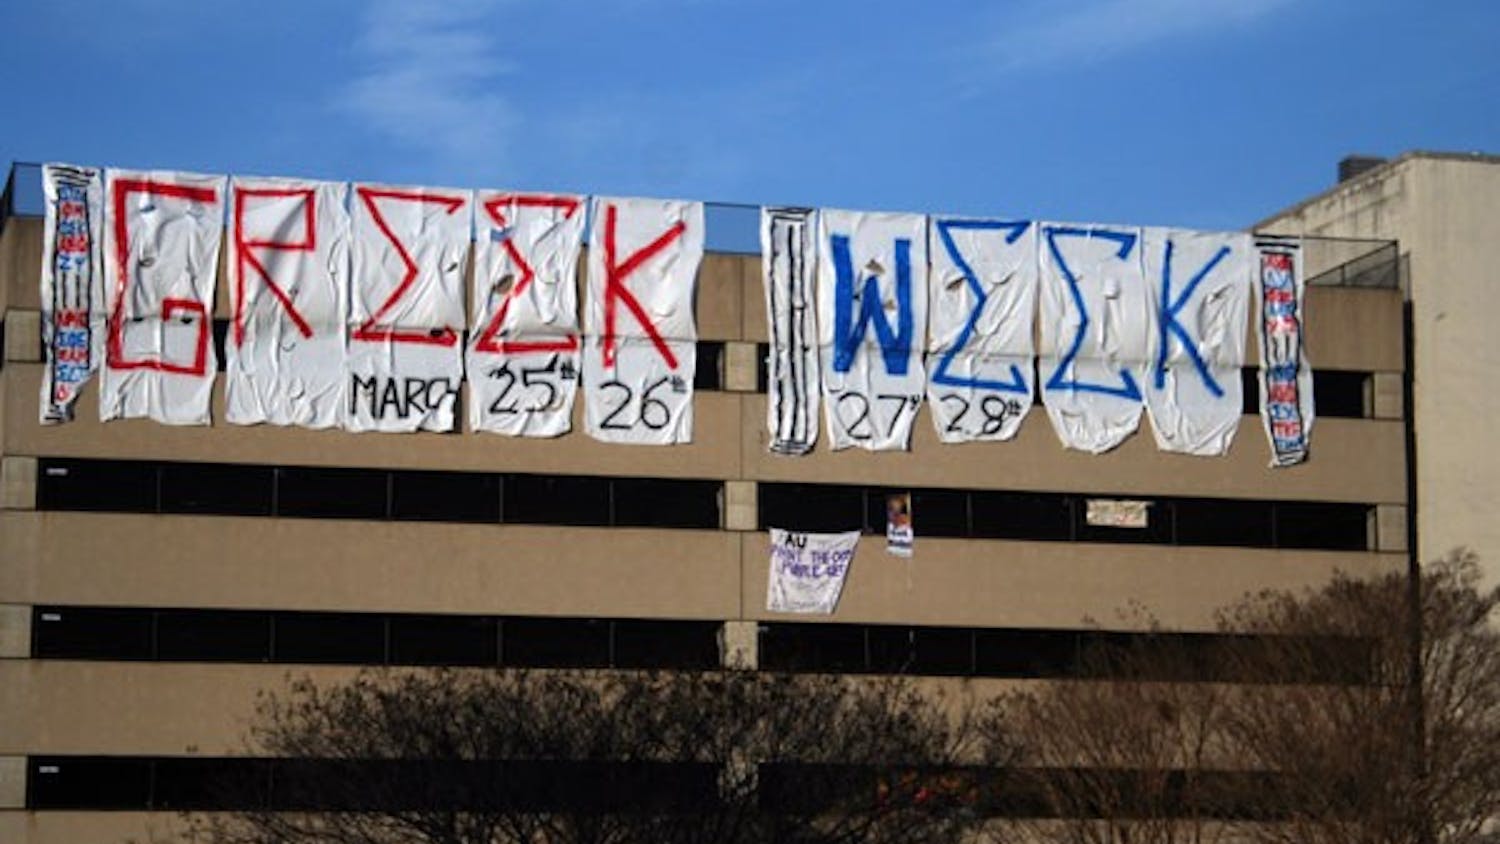 BEST WEEK EVER? â€” This yearâ€™s Greek Week will be four days instead of the regular seven. Greek Week coordinators felt they would get better turnout for the events over a weekend than over an entire week. Stricter alcohol policies will be enforced this year to prevent a repeat of past mishaps. 